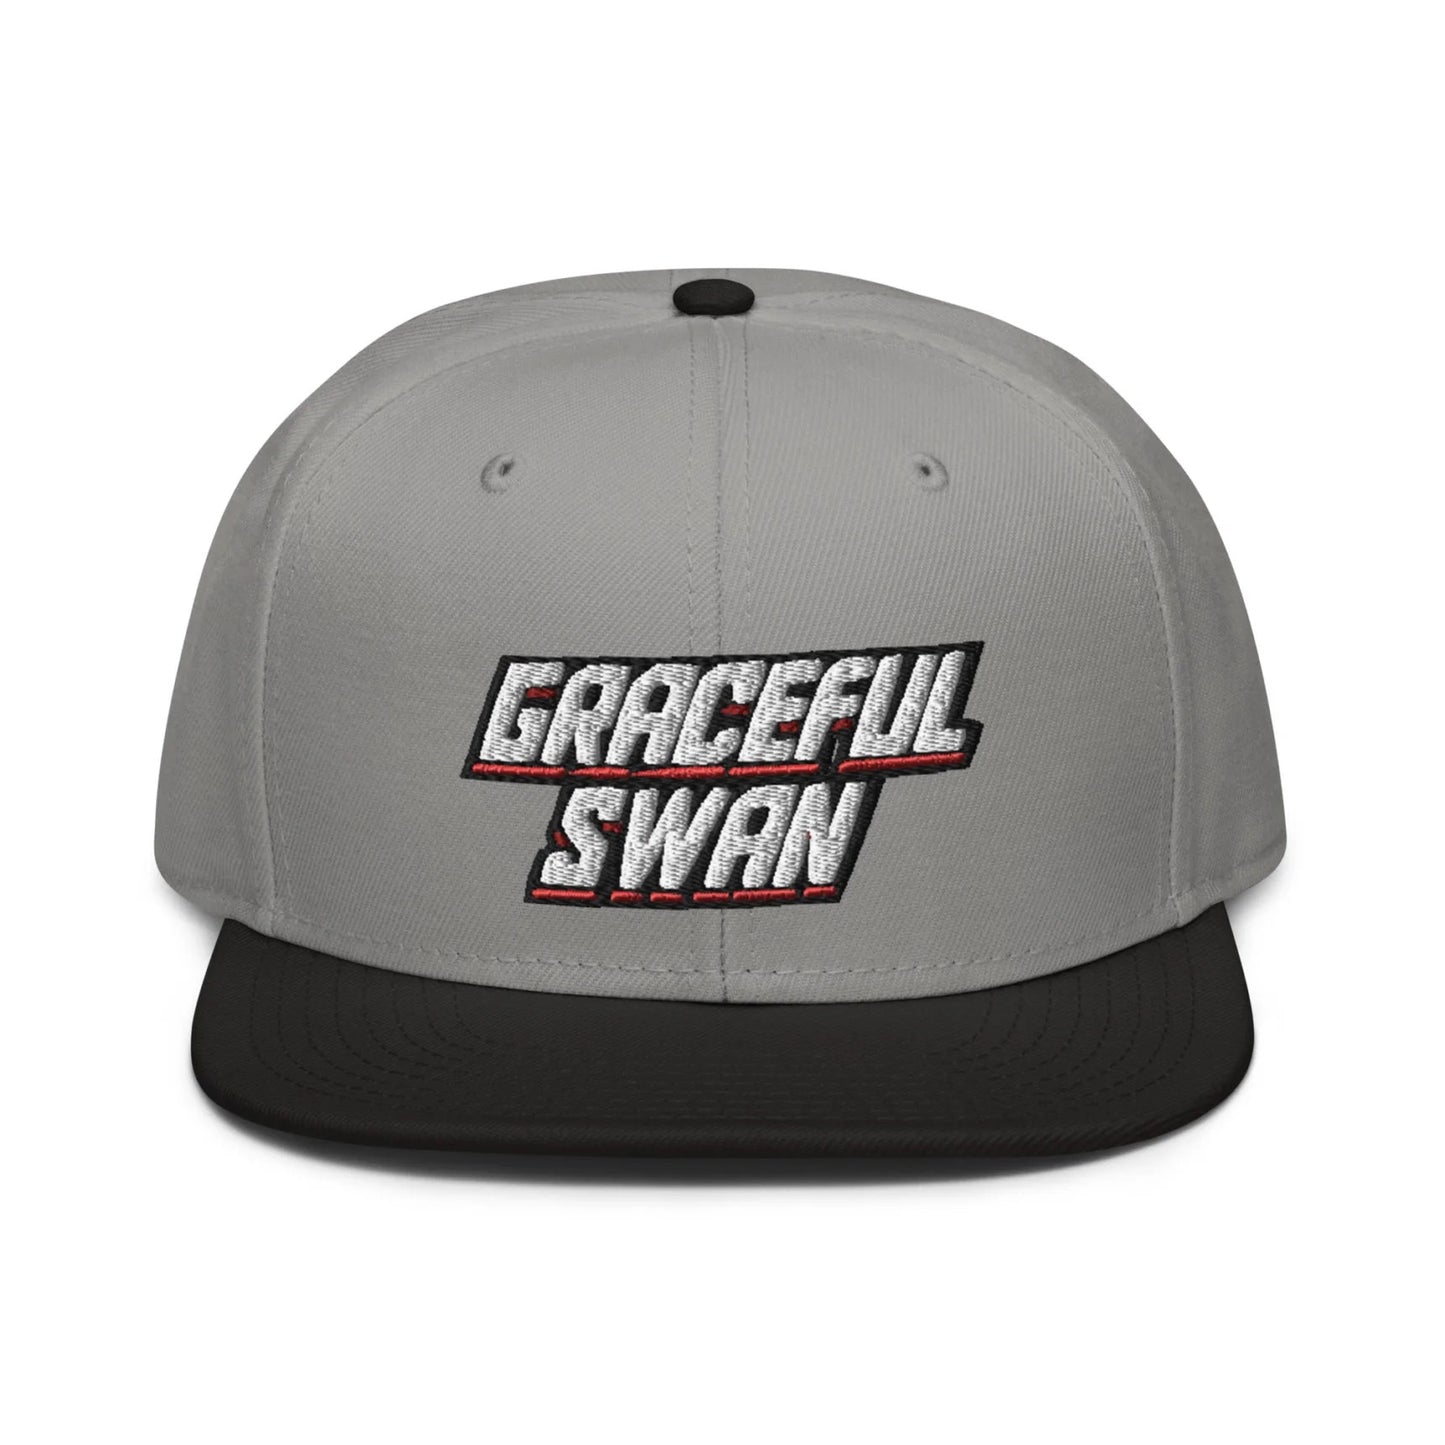 Graceful Swan ShowZone hat in grey with black brim and accents